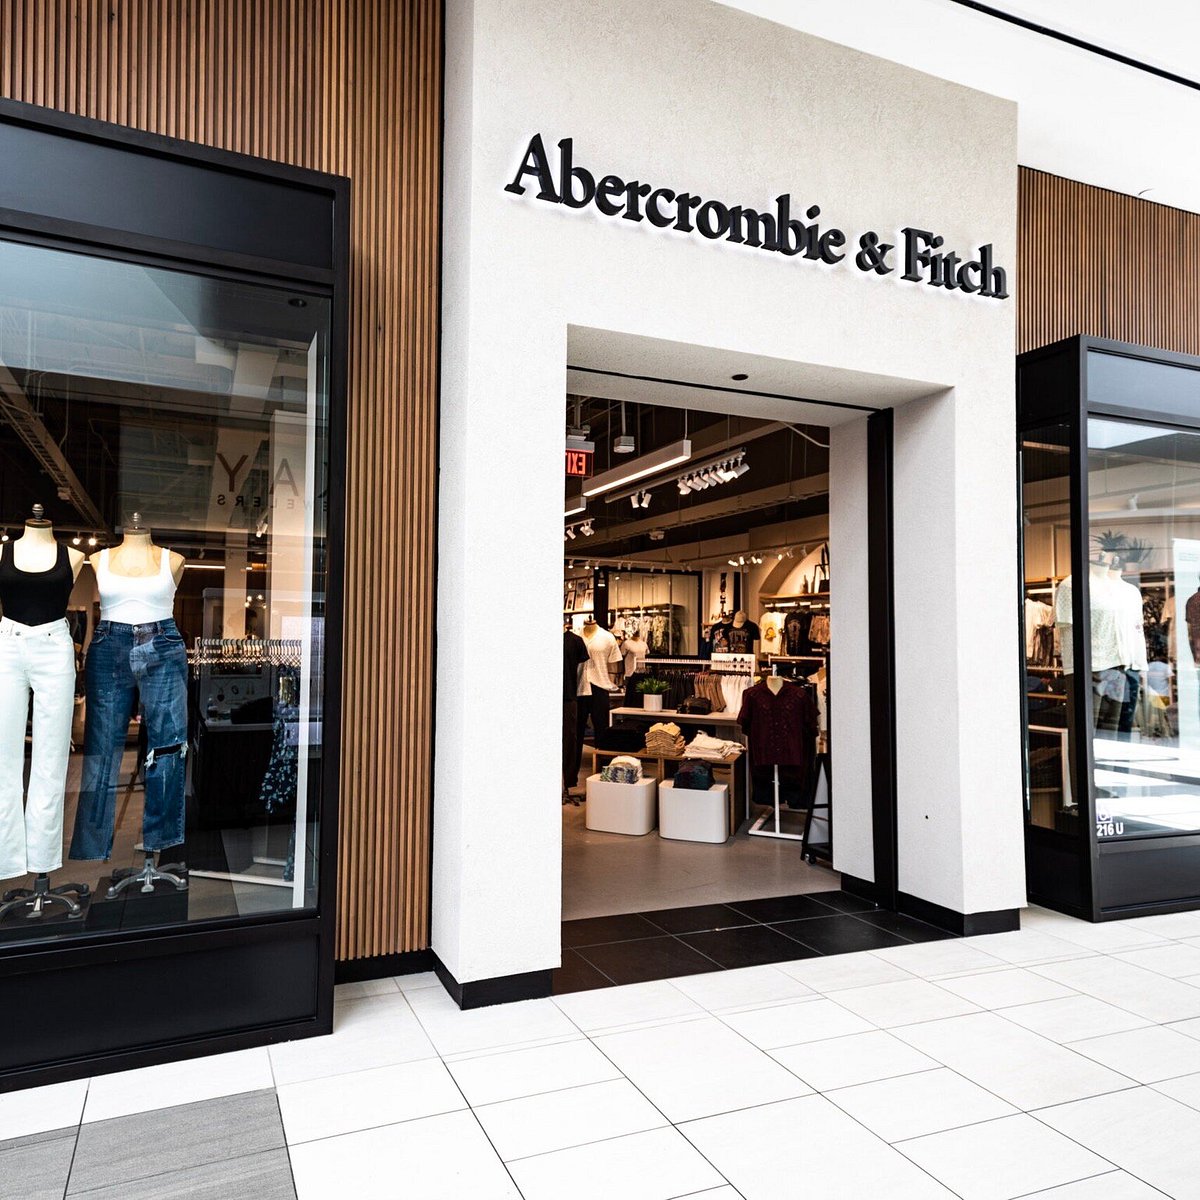 Abercrombie & Fitch - Arese (mi) - All You Need to Know BEFORE You Go